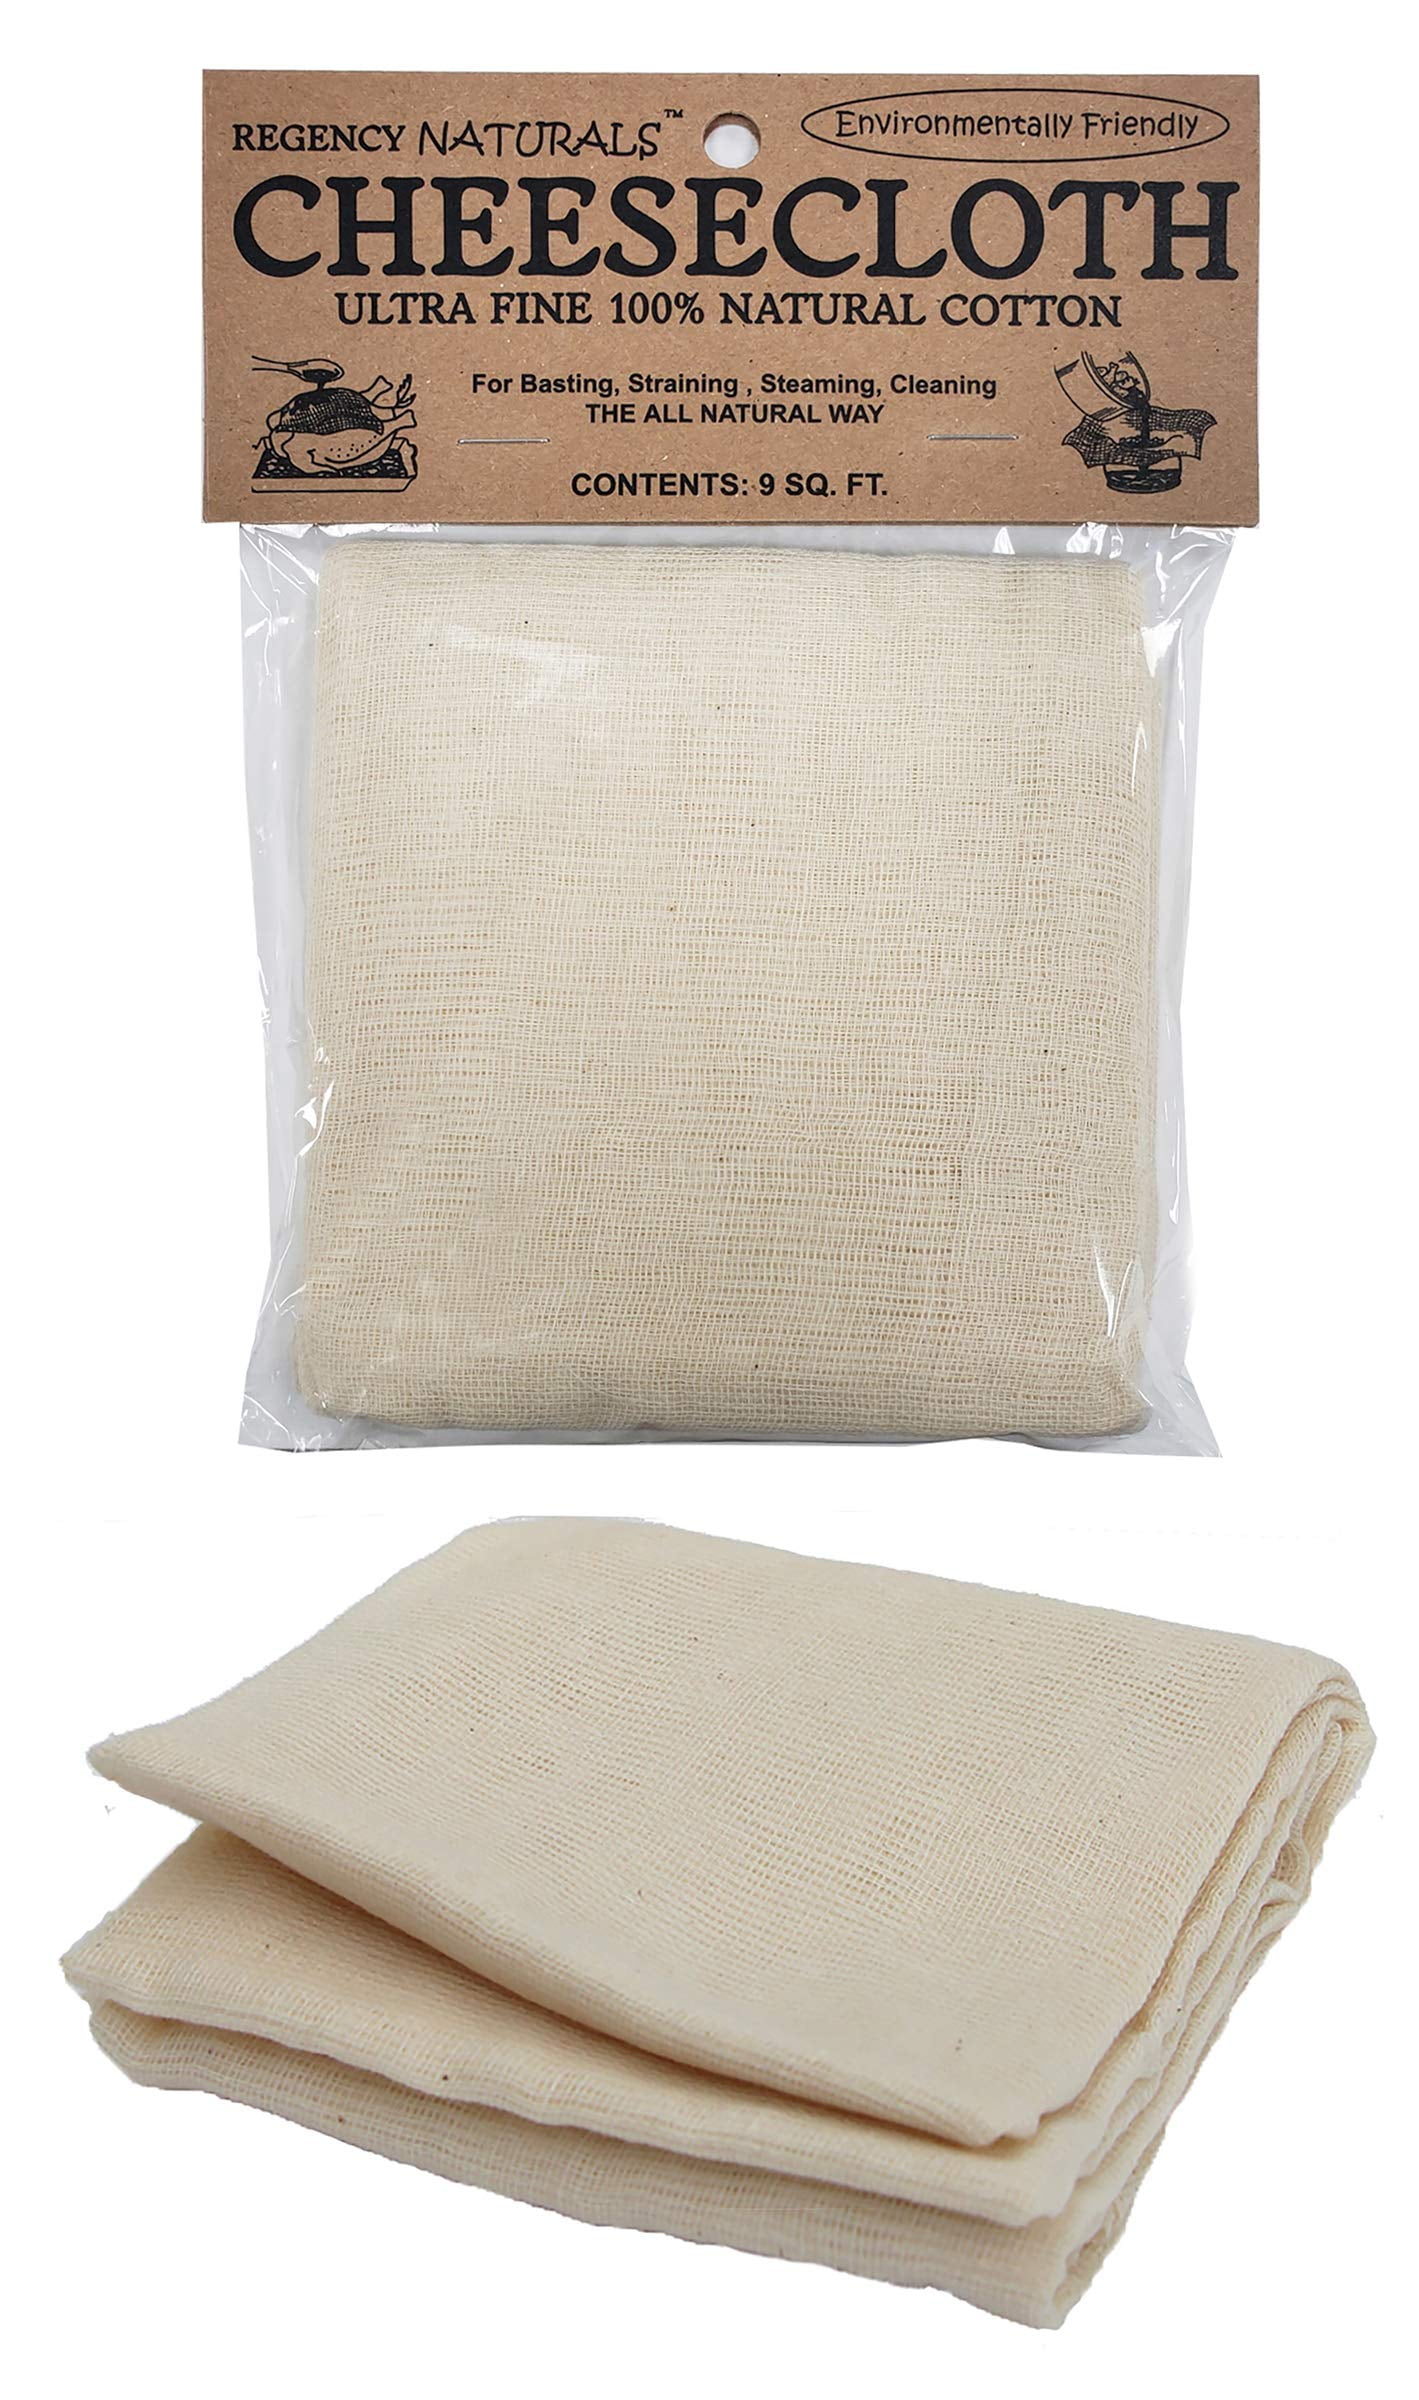 Details about   Regency Wraps Natural Ultra Fine Cheesecloth 100% Cotton For Basting Turkey 